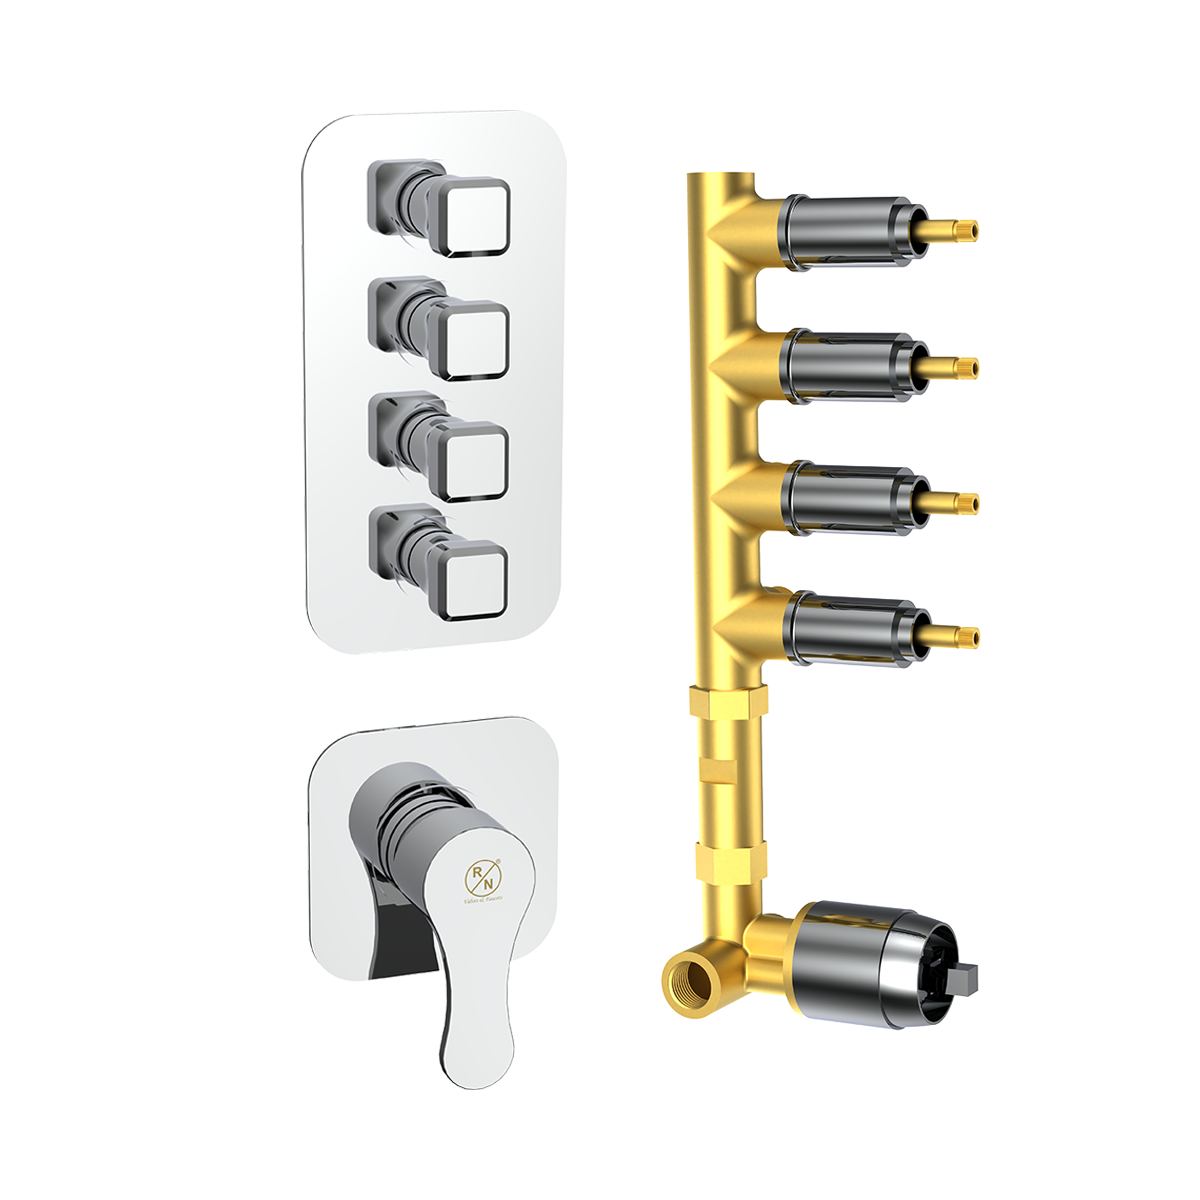 6 Way Single Lever Concealed Diverter Body,With Expose Part Kit (Consisting Of Operating Lever,Wall Flange & Knobs )